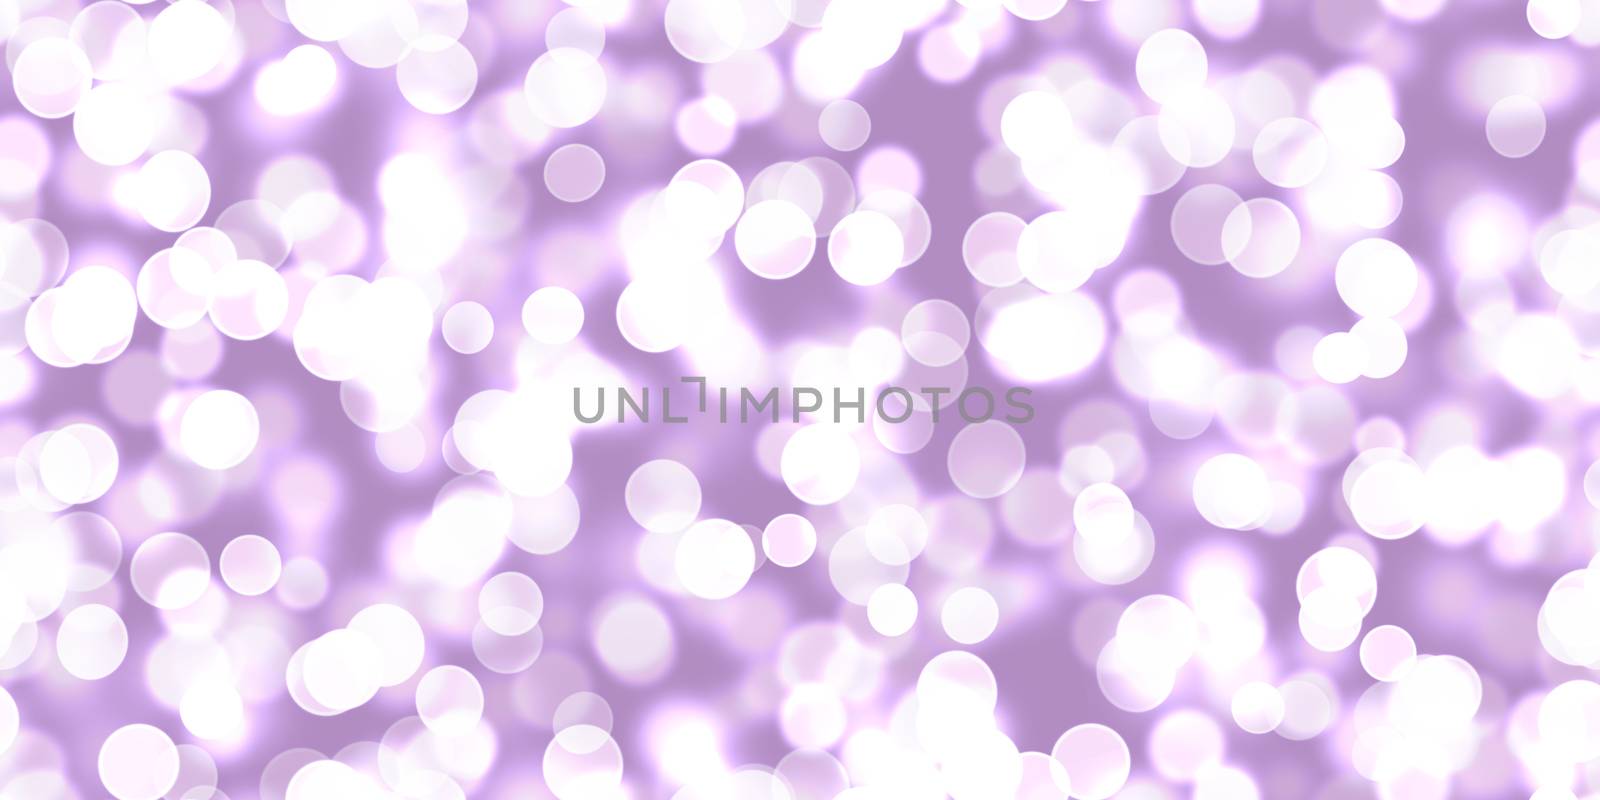 Light Lilac Bright Bokeh Background. Glowing Lights Texture. Shine Celebration Backdrop. by sanches812